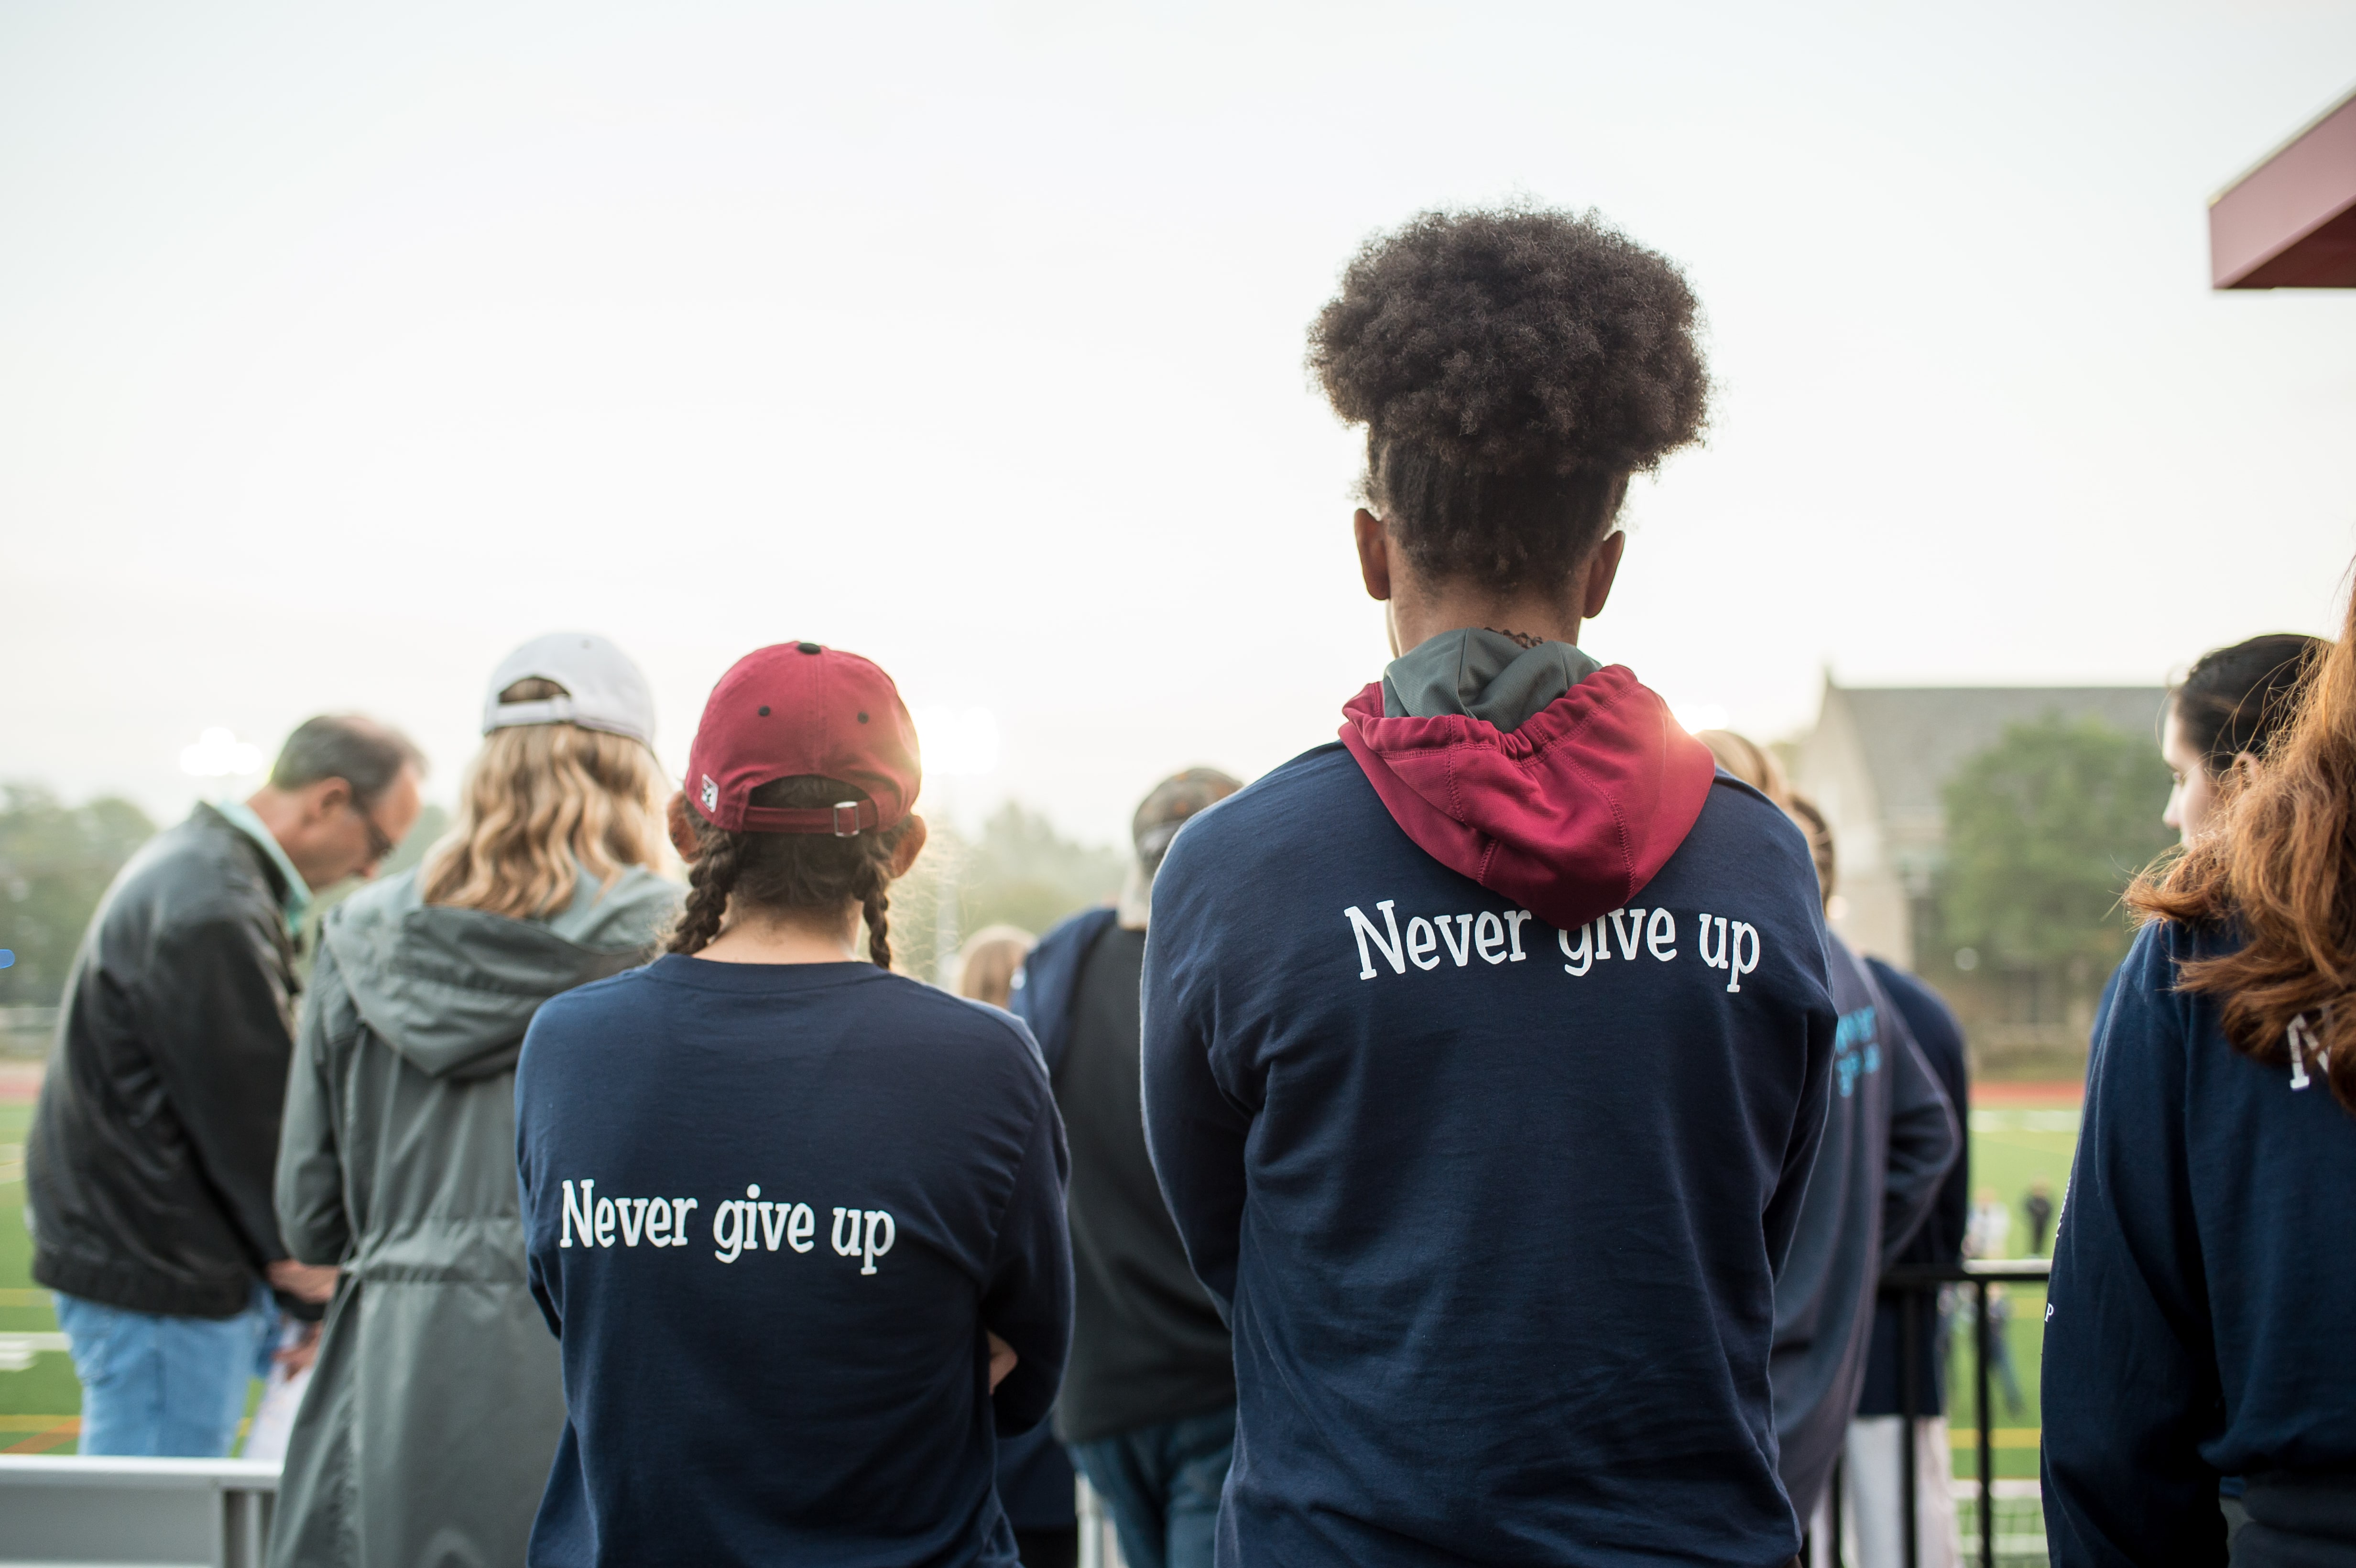 Two students stand with their backs to the camera with 'never give up' written on the backs of their shirts